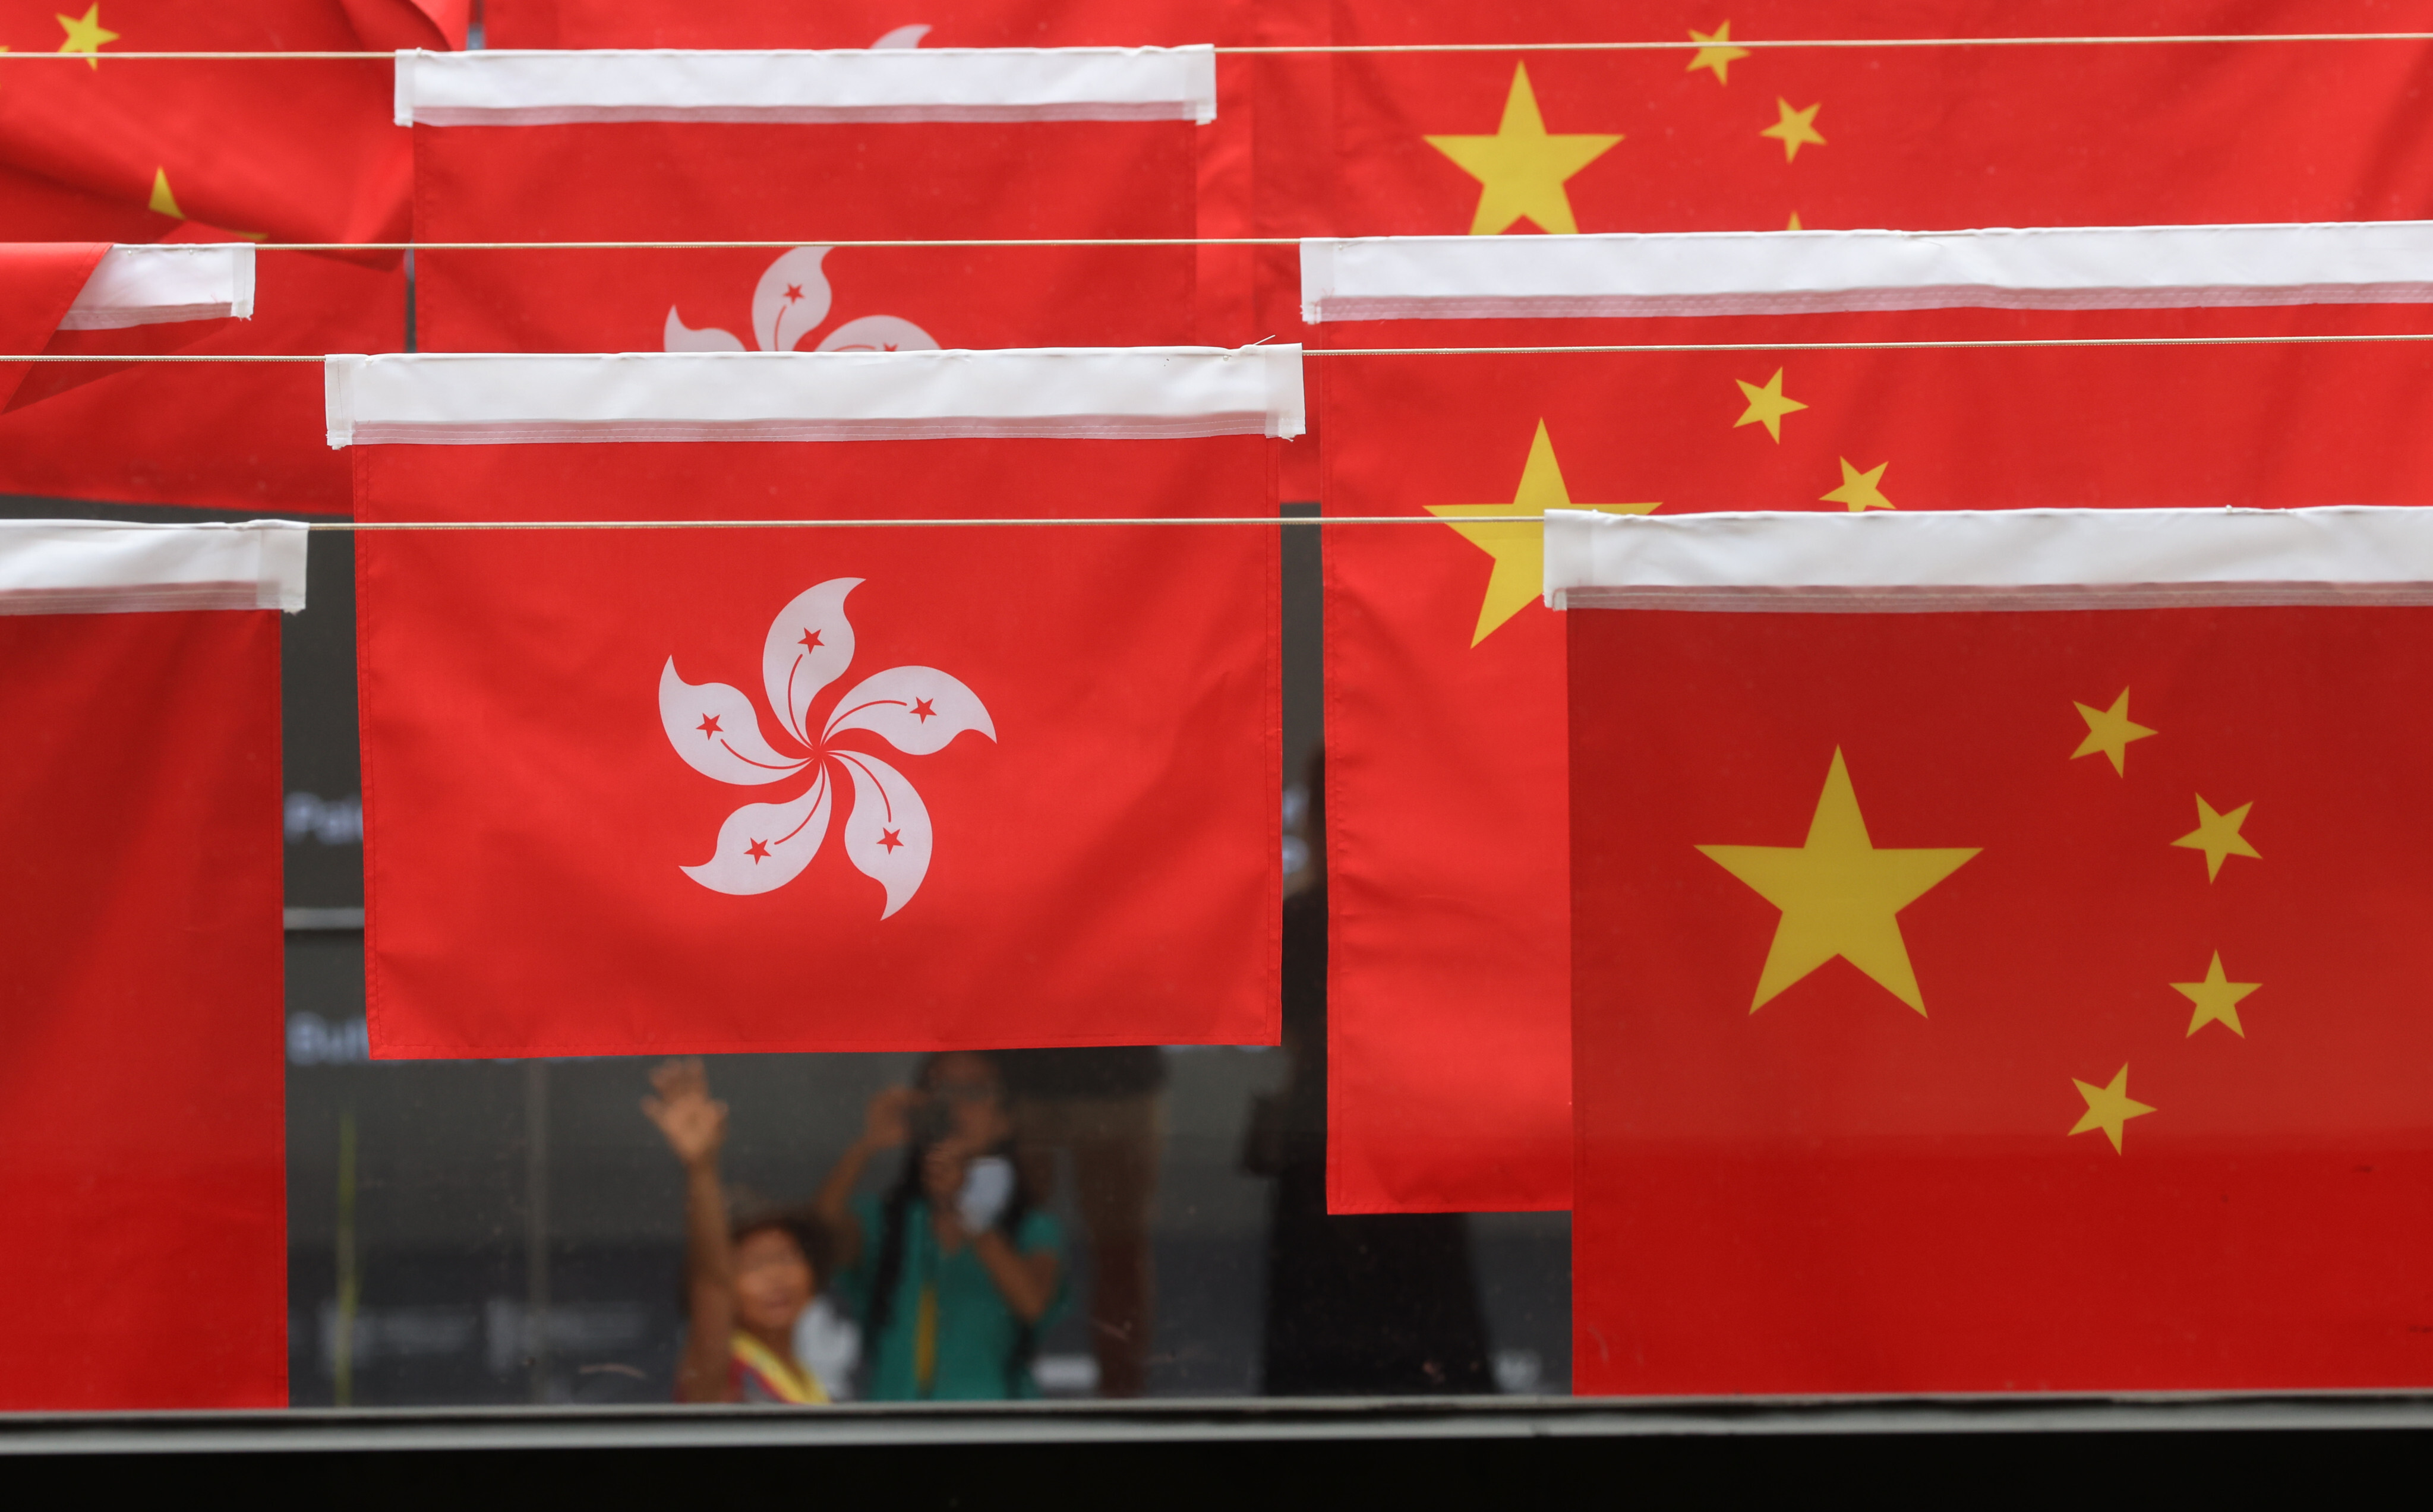 Hong Kong and Chinese flags fly in Central Market for National Day, on September 30, 2021. Chinese leaders are committed to upholding “one country, two systems”. Photo: Dickson Lee